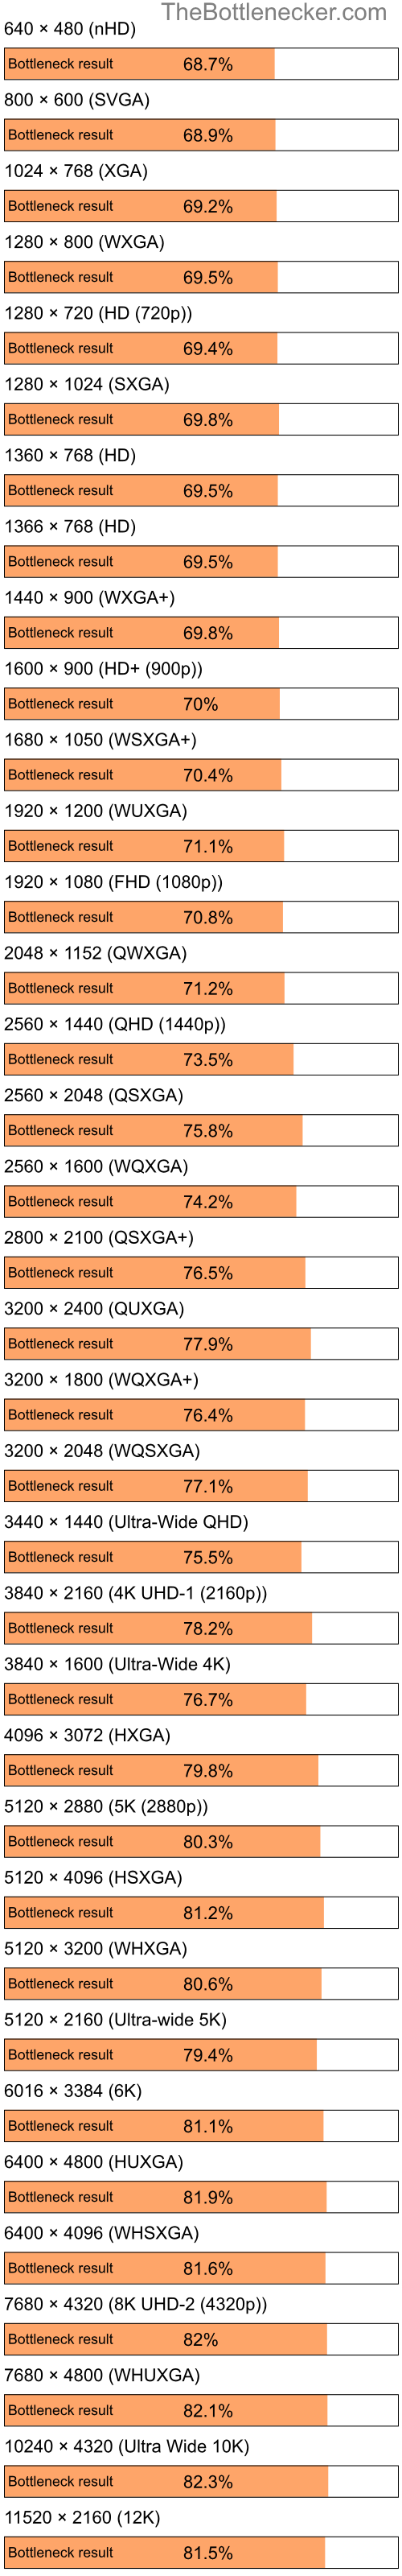 Bottleneck results by resolution for Intel Celeron M 410 and AMD Mobility Radeon X1700 in Graphic Card Intense Tasks